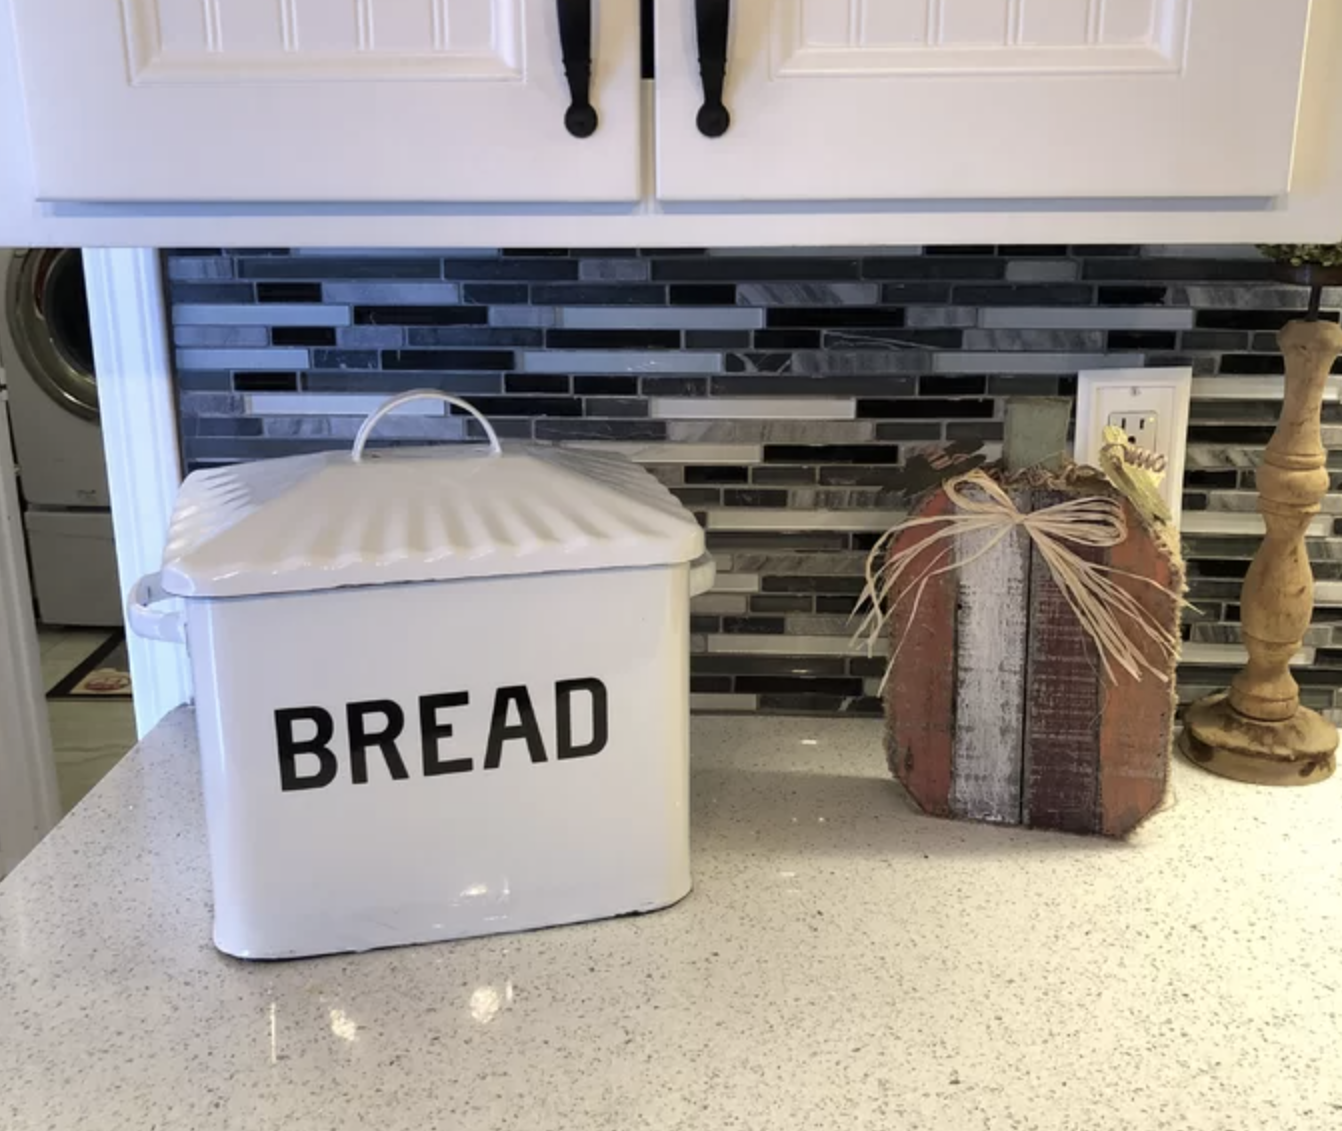 The breadbox sitting on a countertop